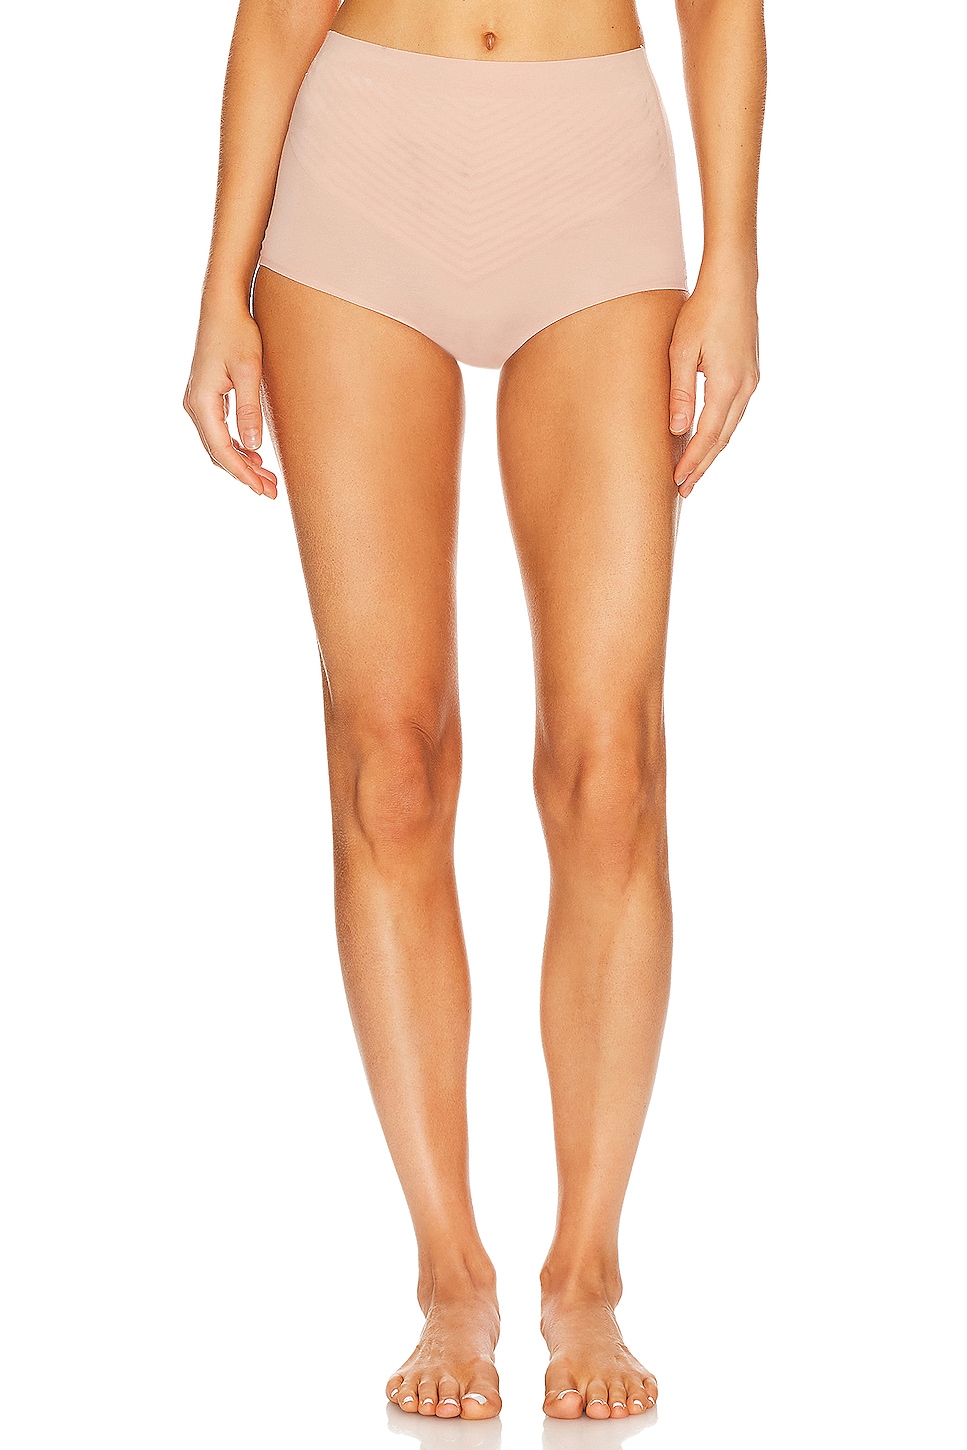 Wolford Cotton Control 3w High Waist Panty in Rose